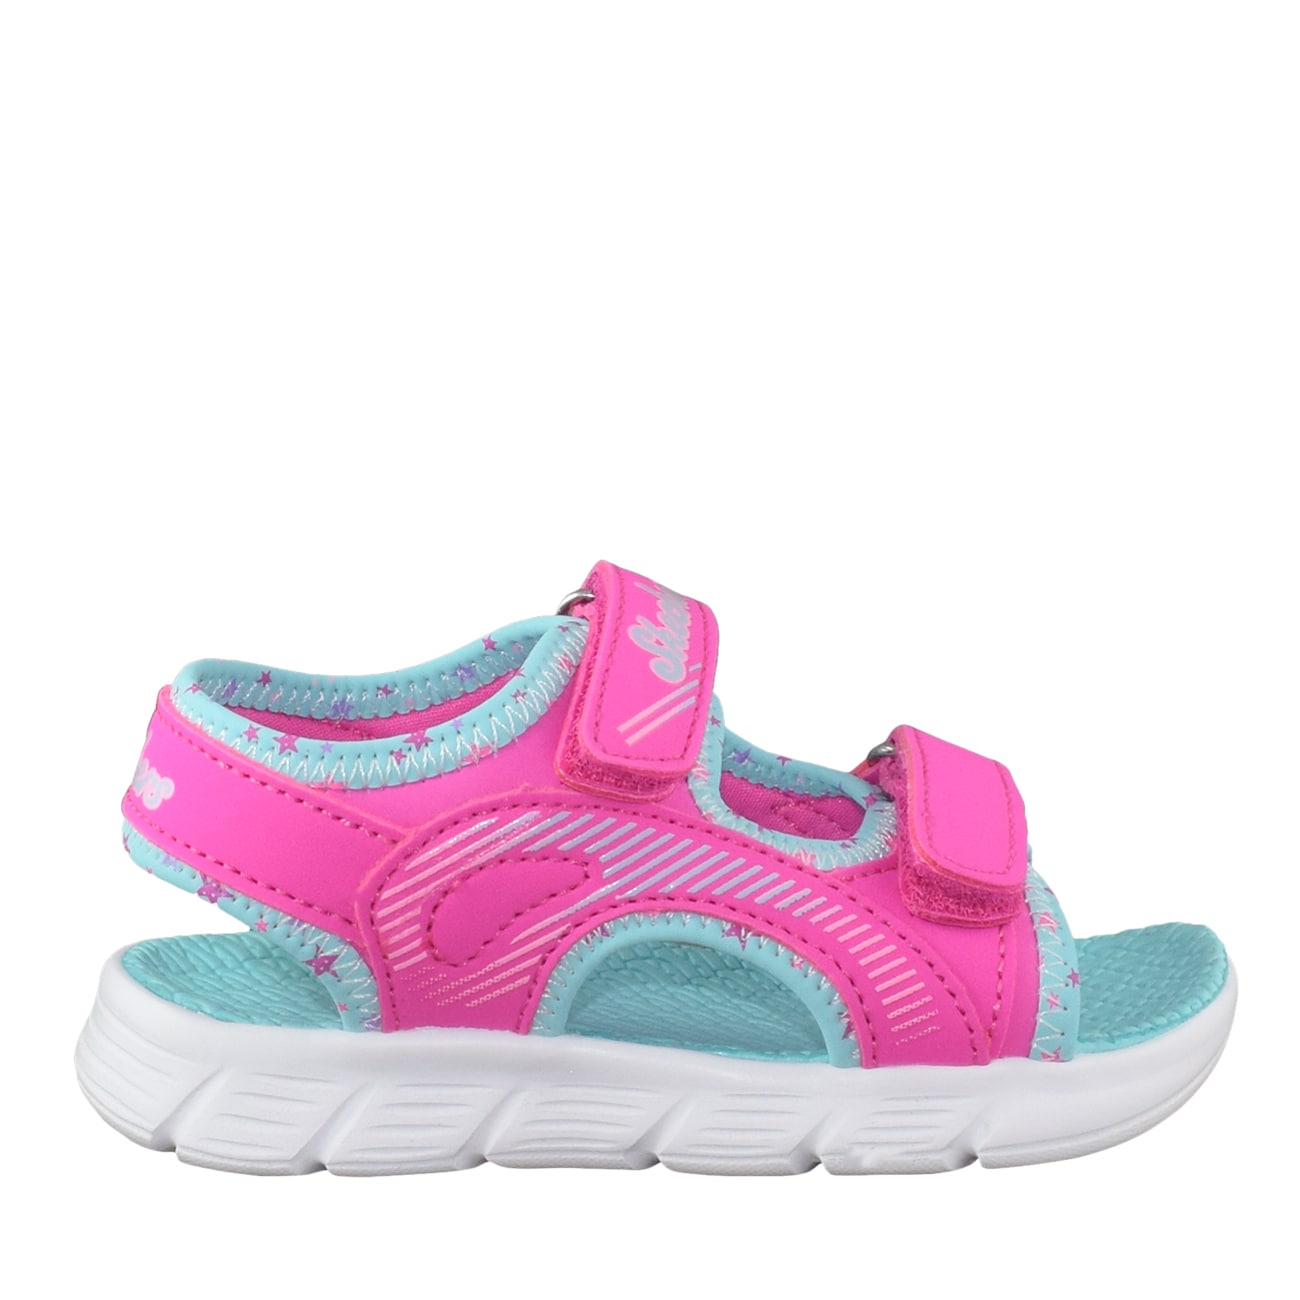 skechers toddler shoes canada